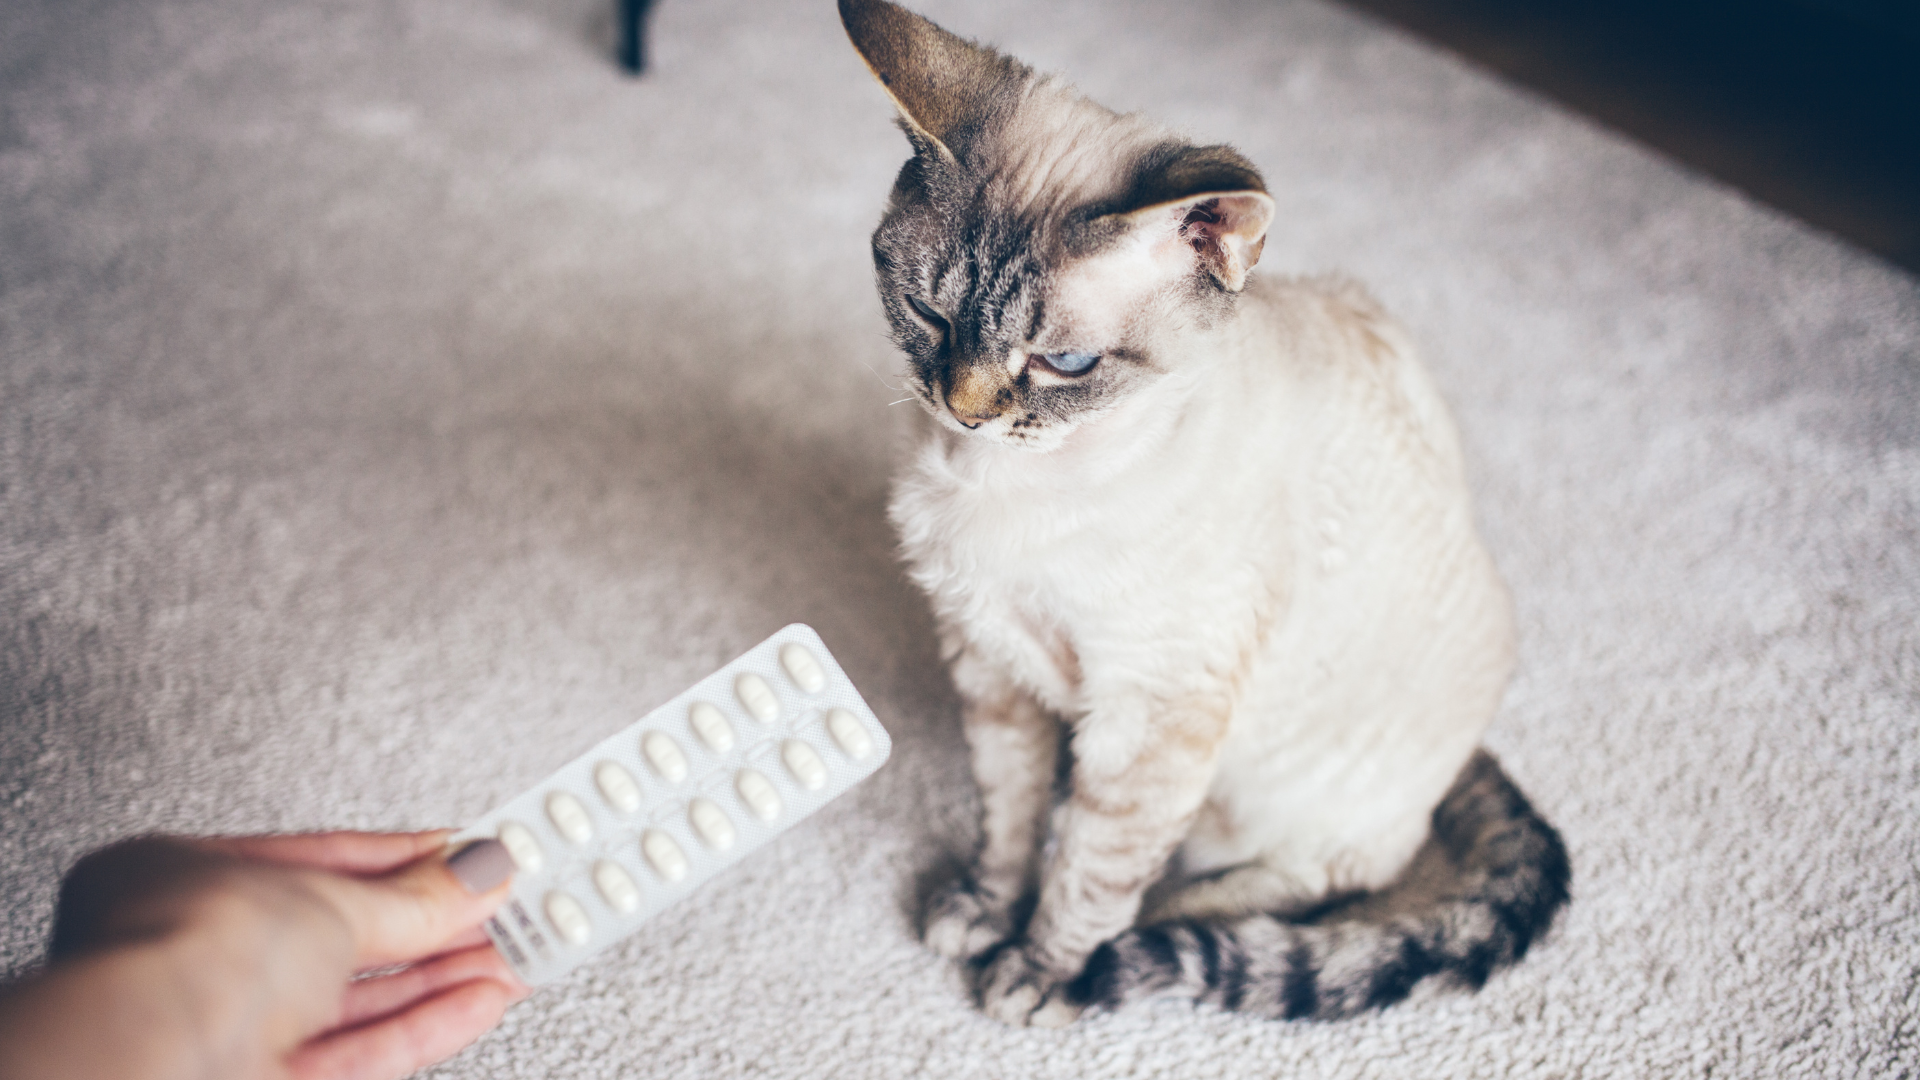 Woman giving medicines to cat